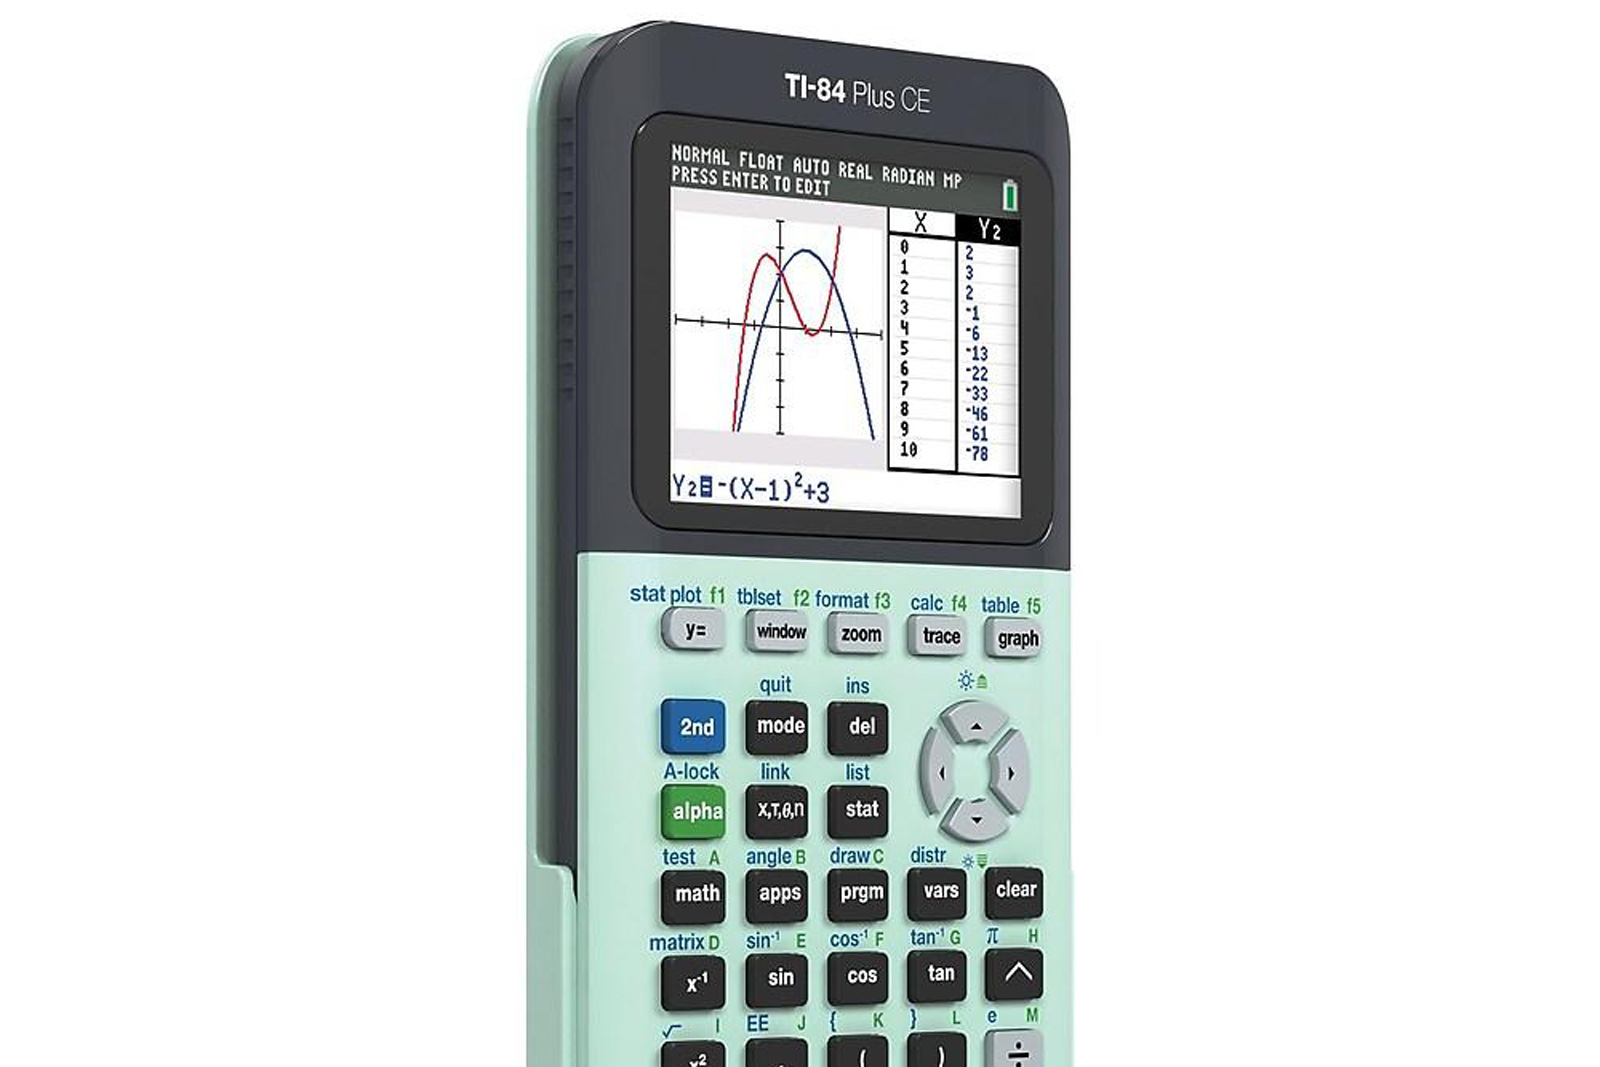 Texas Instruments Makes It Harder To Run Programs On Its Calculators Engadget